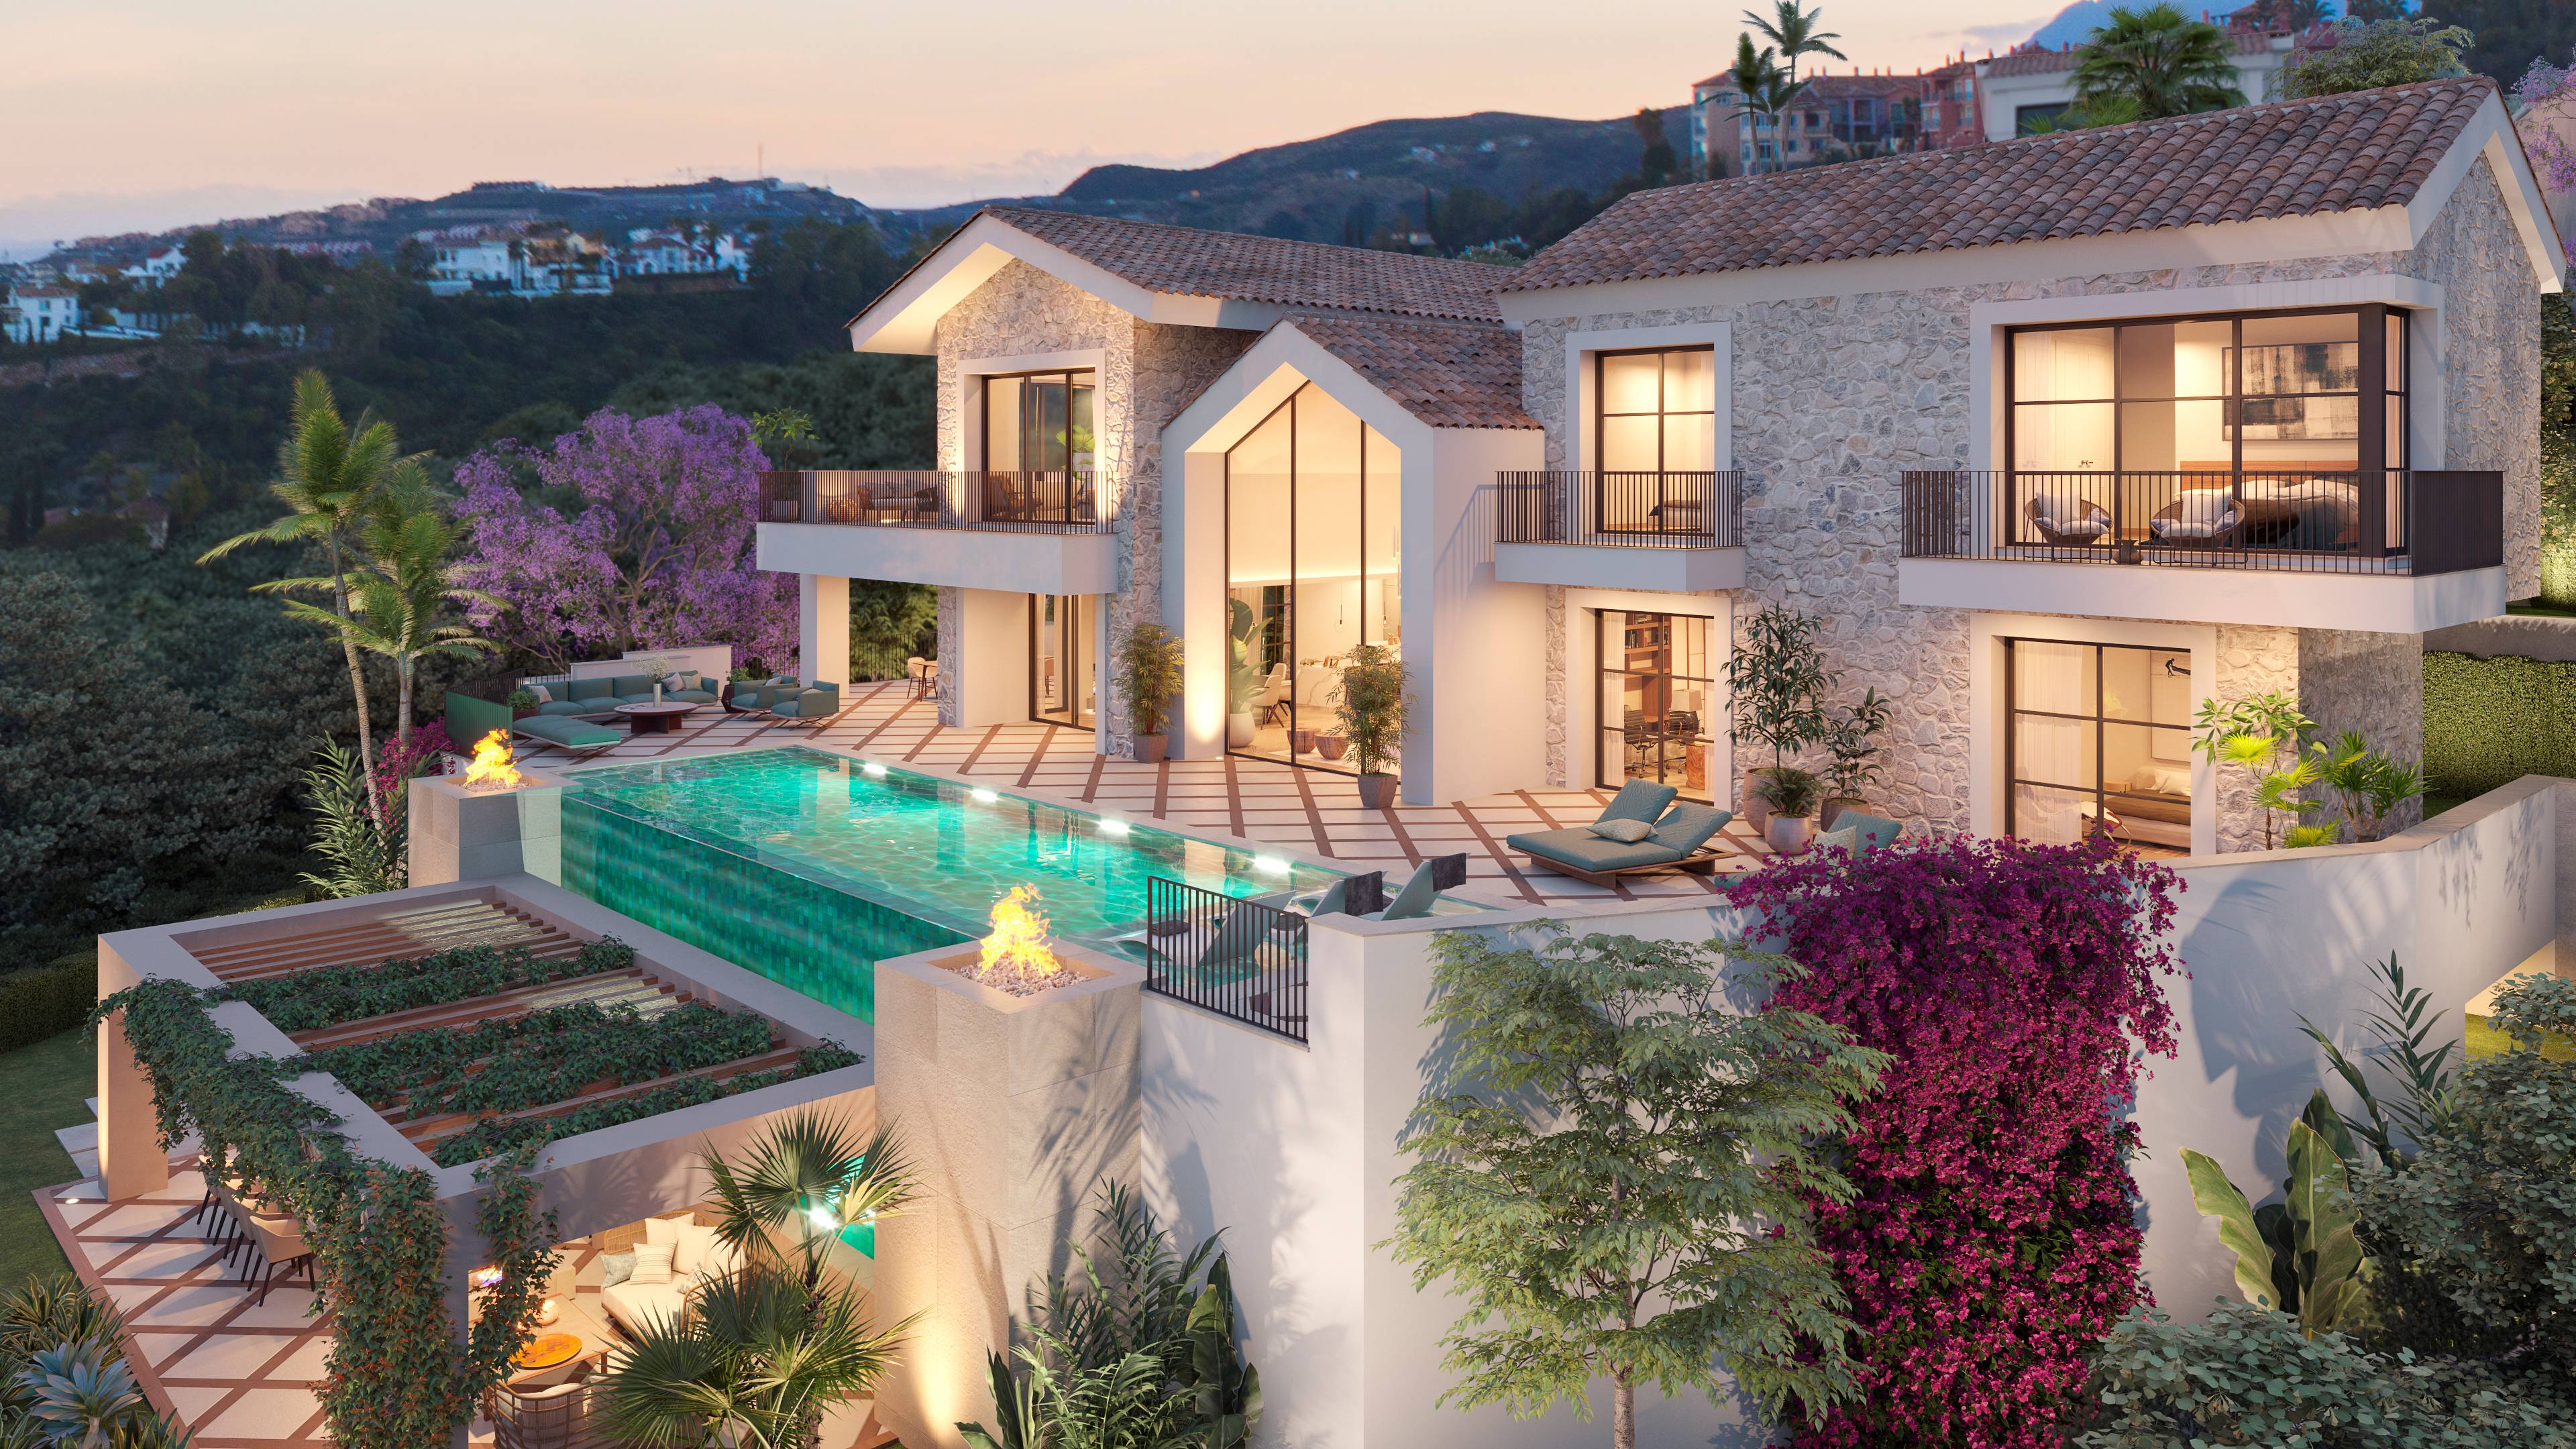 Spanish Corner - Villa 15: Near to completion, this stunning estate is situated on a luxurious plot within the exclusive gated community of The Hills in La Quinta